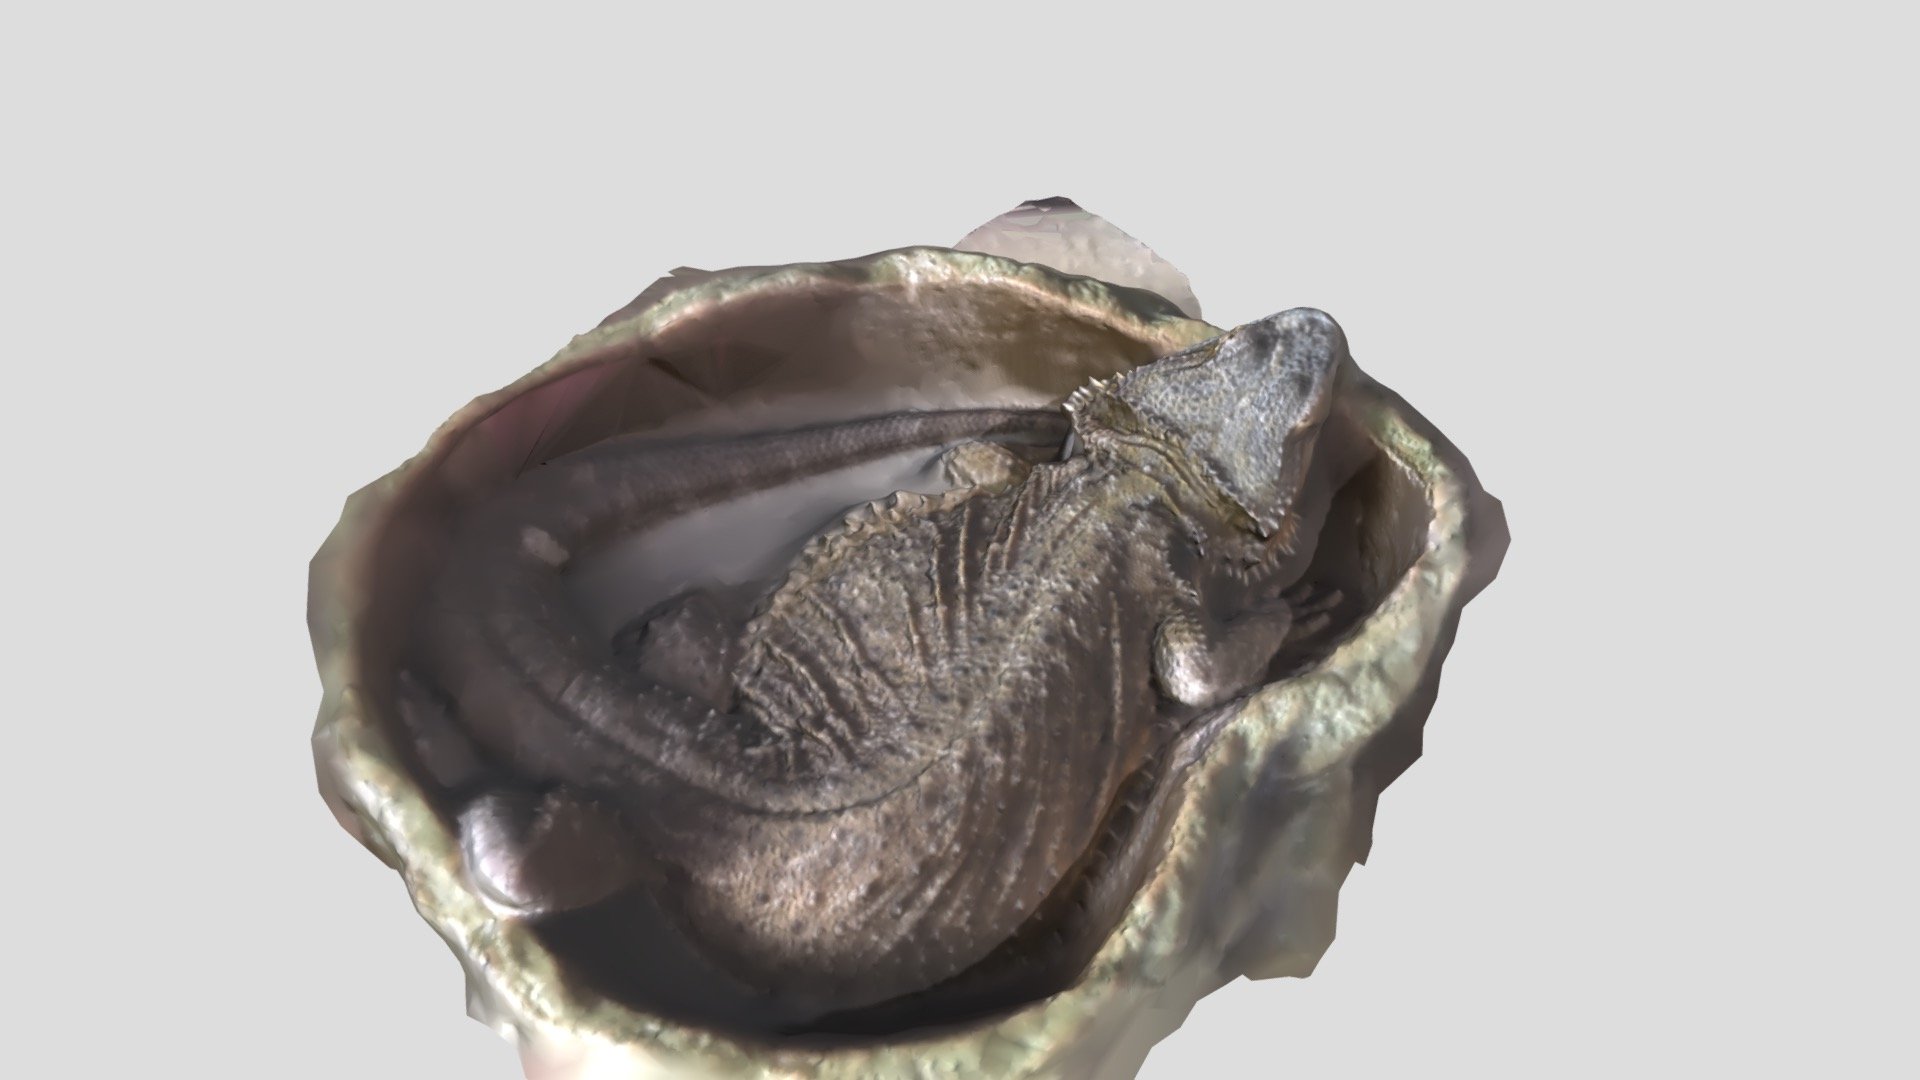 3D scan of the sleeping bearded dragon (Pogona vitticeps). His name is Dornan, and he likes (to eat) the locusts 3d model